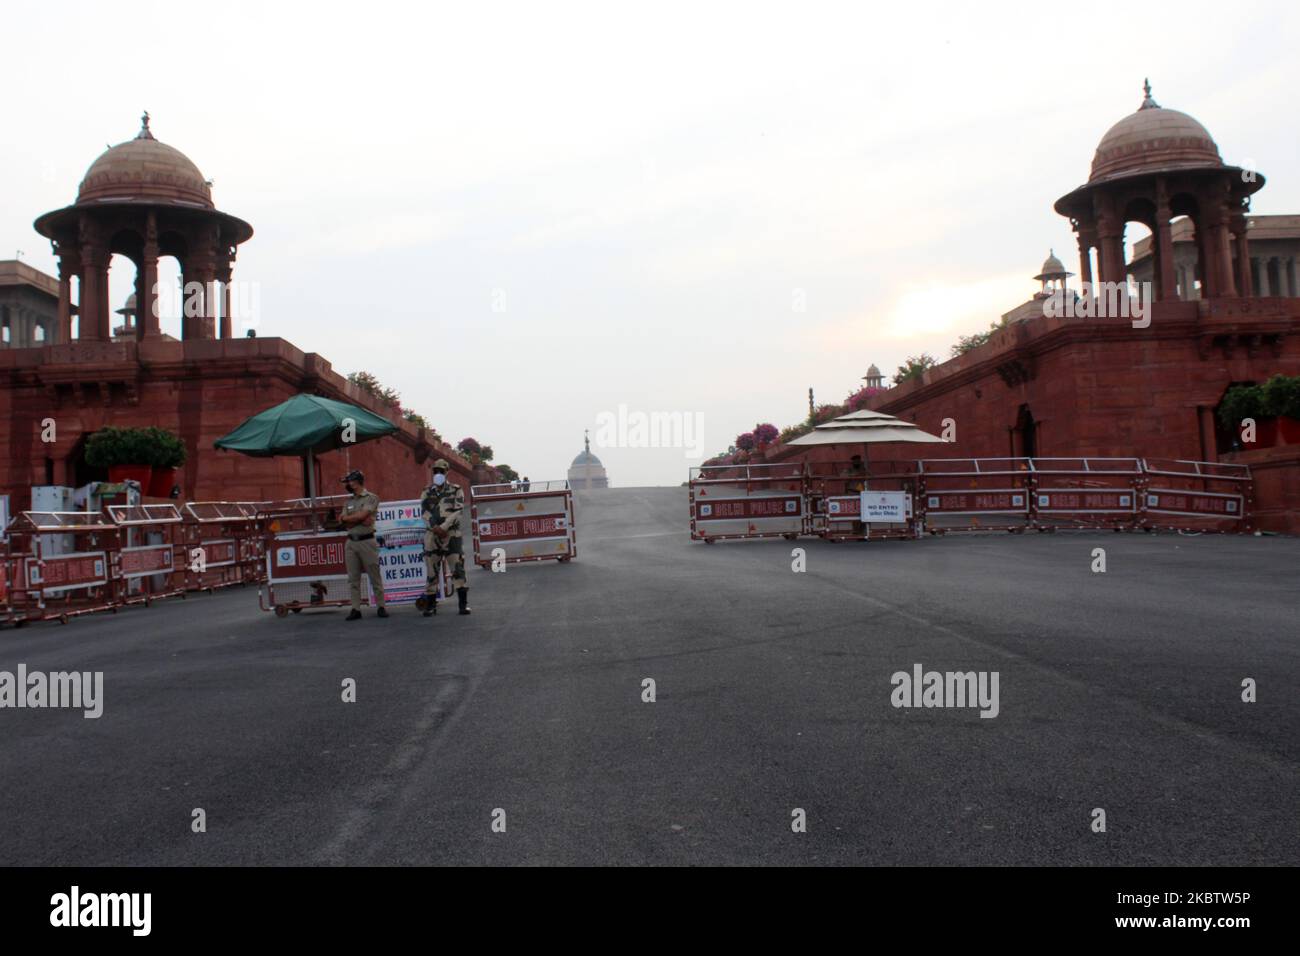 A deserted view of Rajpath on July 18, 2020 in New Delhi as it remains closed to curb the spread of coronavirus in the national capital. Amid the threat of coronavirus spread, the India Gate and Rajpath leading to Presidents estate has been closed for the visitors till further notice. The shut down comes in a bid to curb mass gathering and public exposure to avoid the transmission of COVID-19 virus. (Photo by Mayank Makhija/NurPhoto) Stock Photo